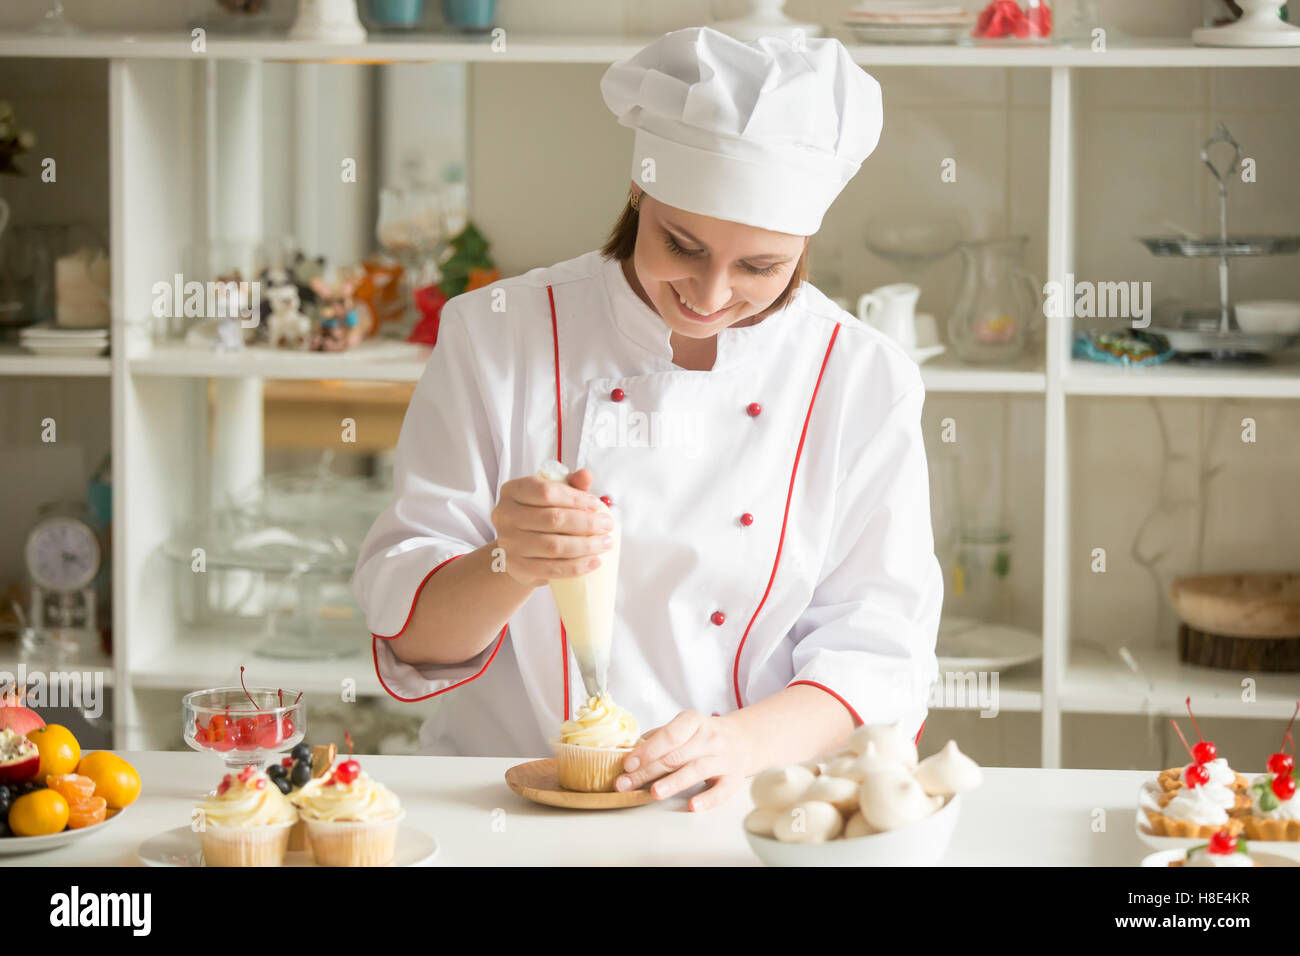 Portrait of confectioner topping a cupcake with cream Stock Photo